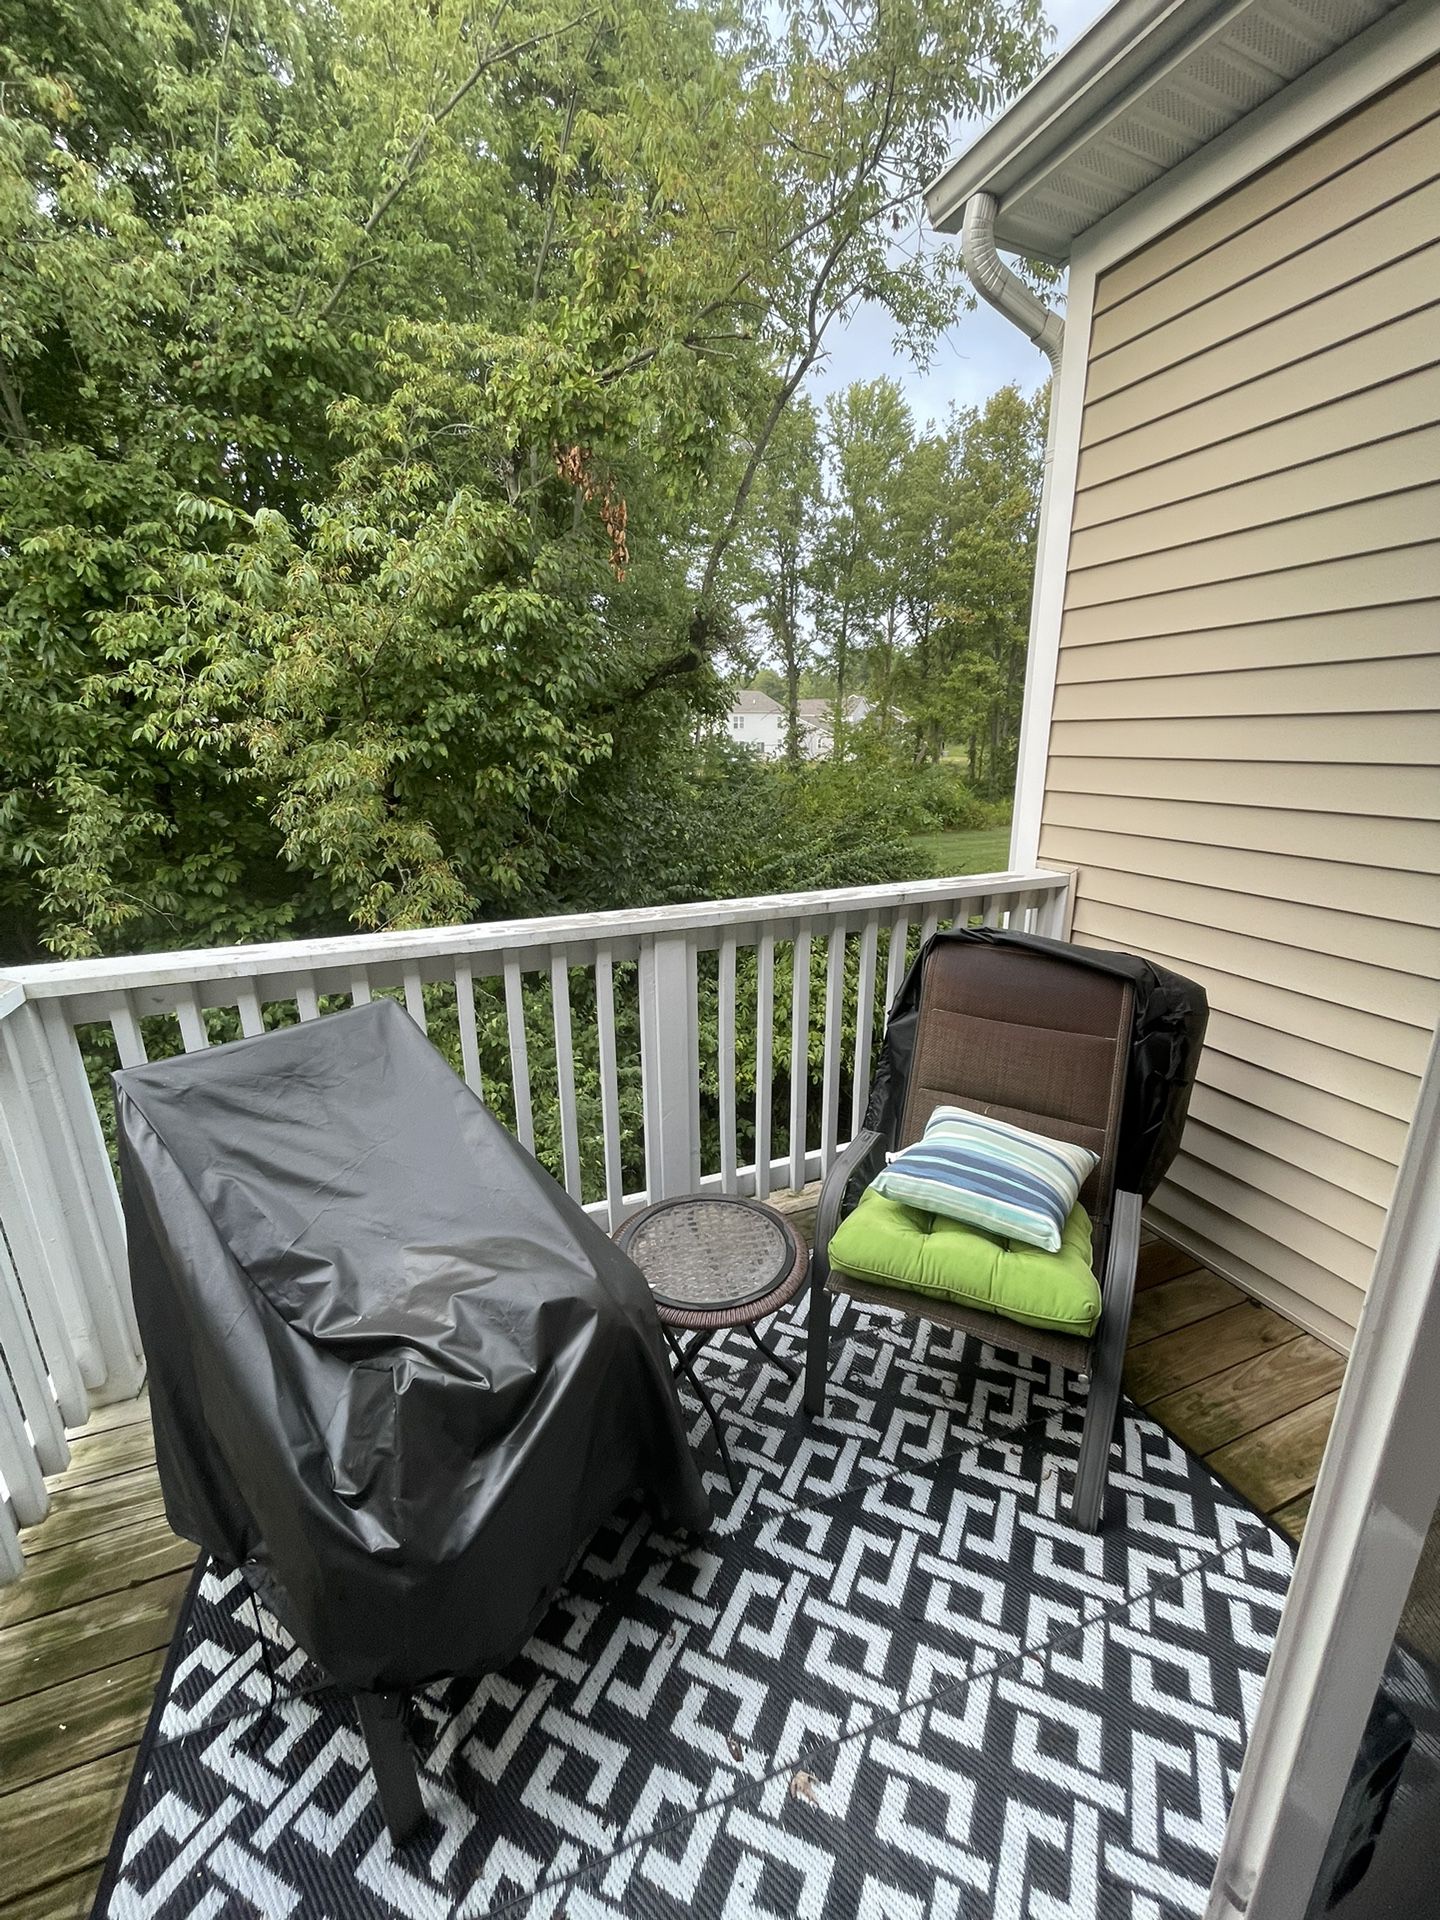 Patio Furniture, Including Cushions Furniture (Seller Keeping The Chair Covers)